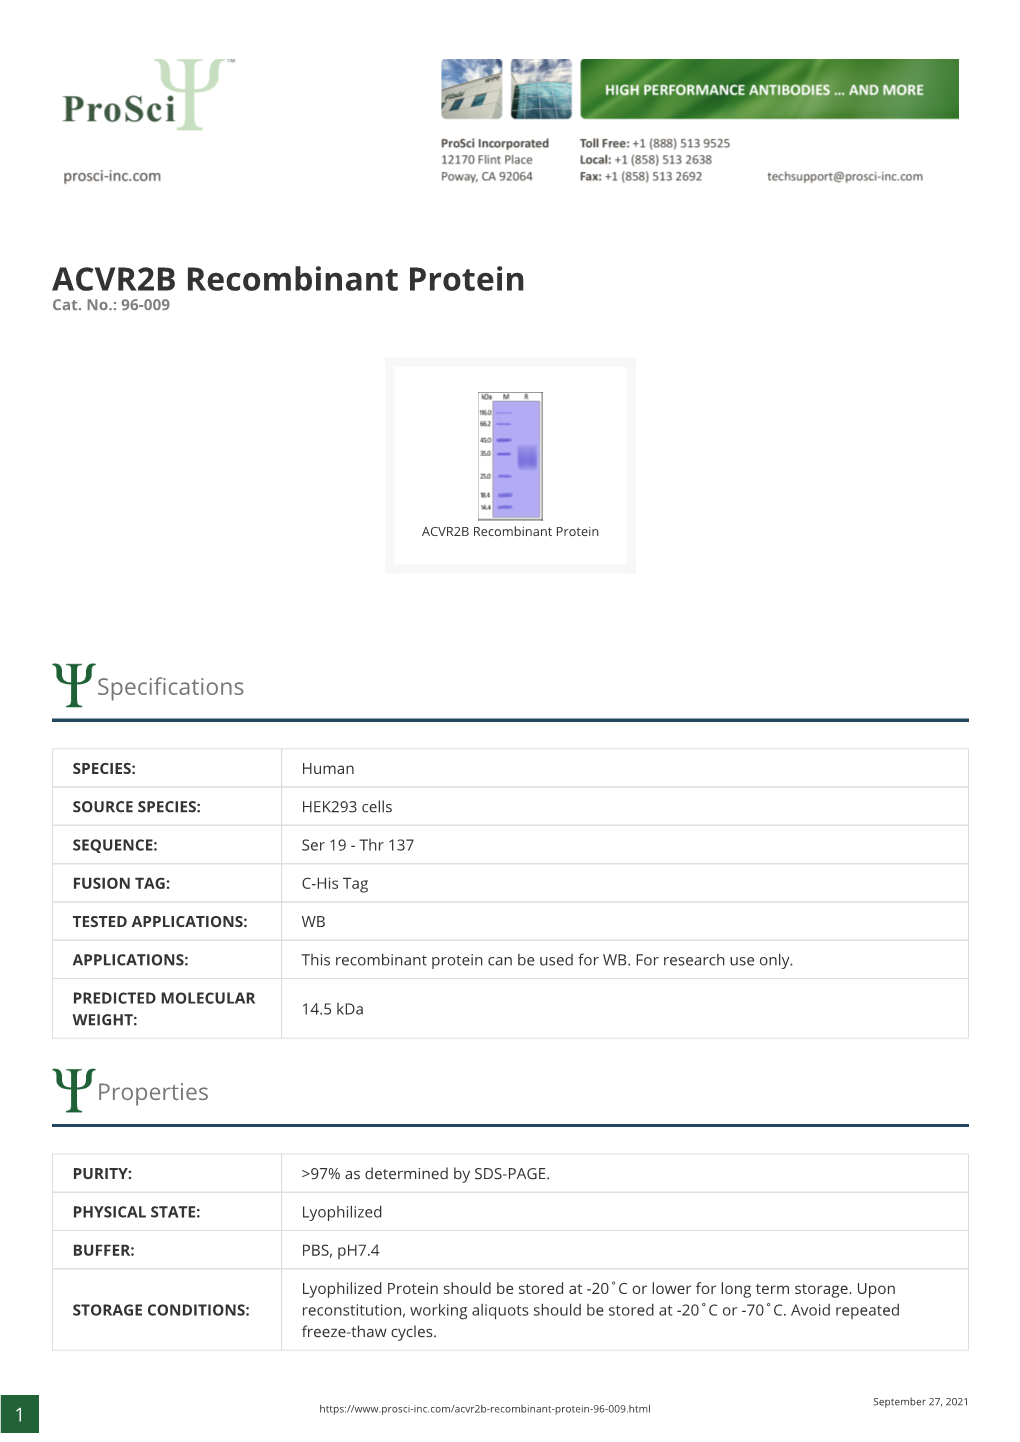 ACVR2B Recombinant Protein Cat